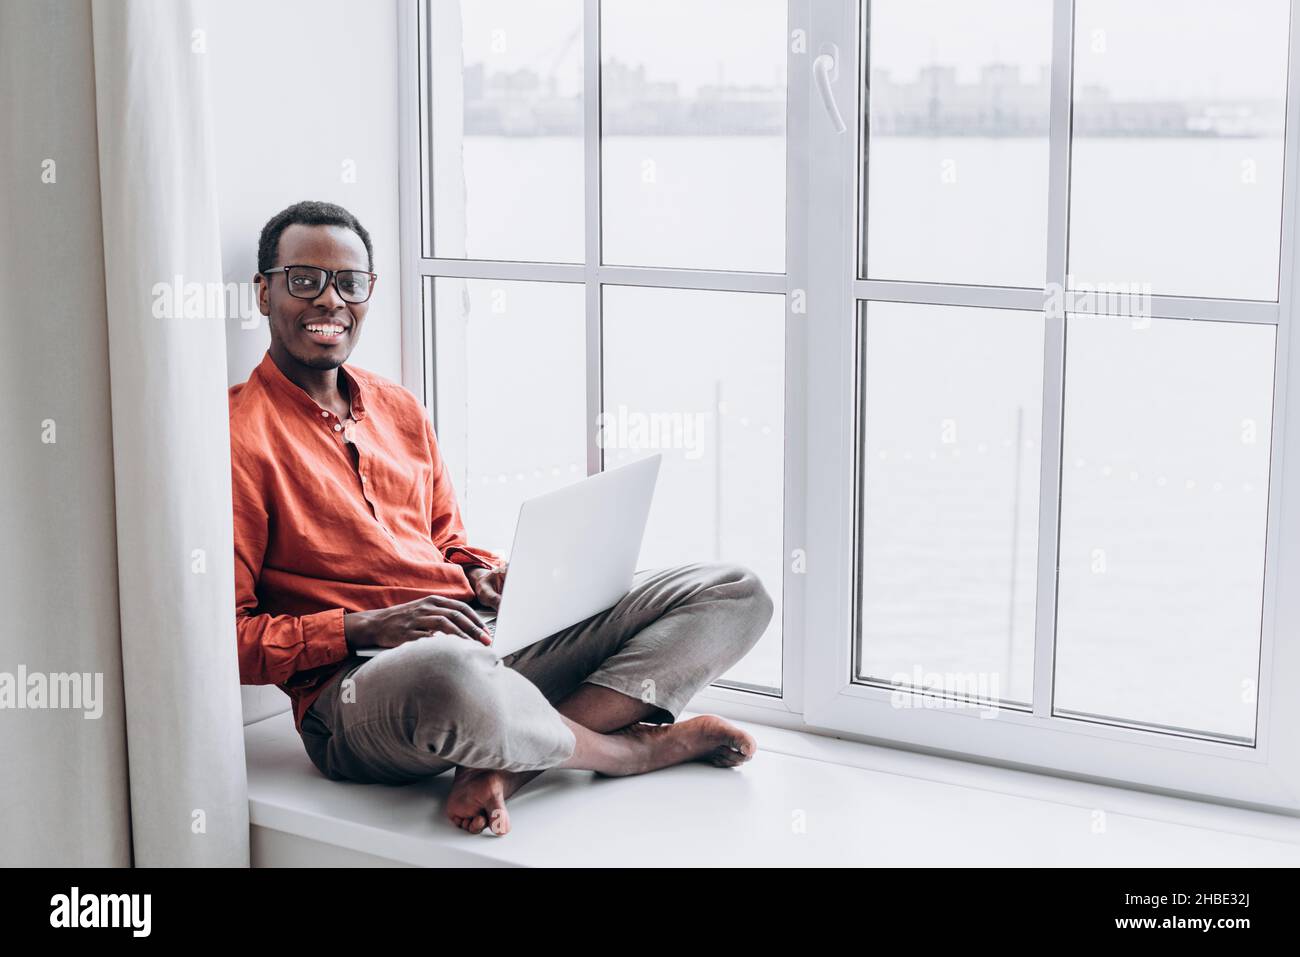 Young man African businessman with glasses is sitting at a laptop on the windowsill of a house looking at the camera and smiling Stock Photo